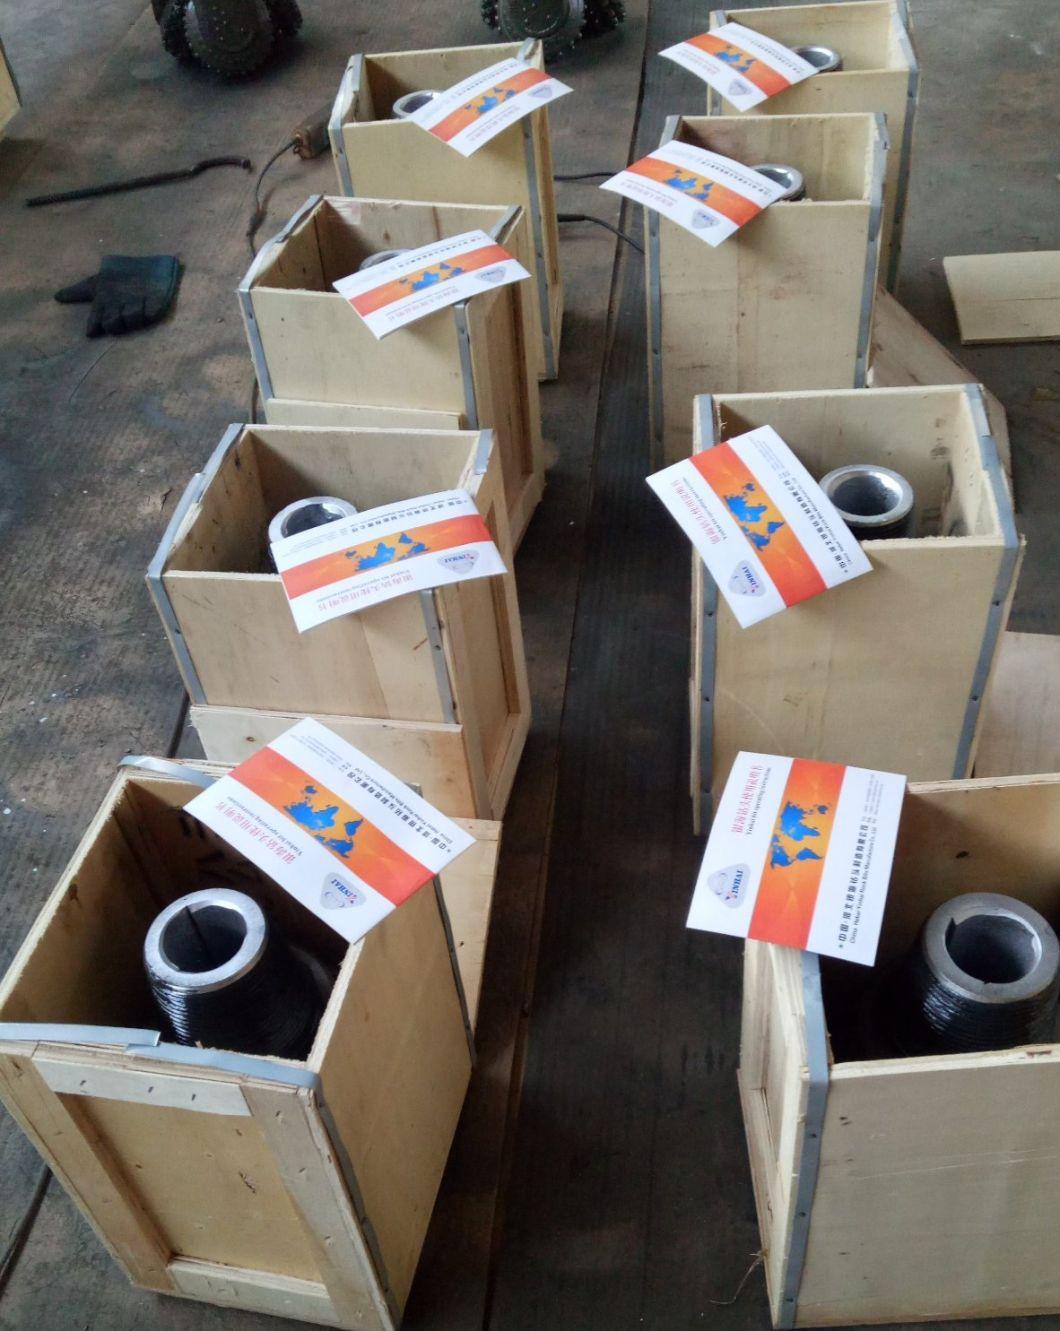 216mm 8 1/2" IADC517 Factory Produces Tricone Bit for Water Well Drilling